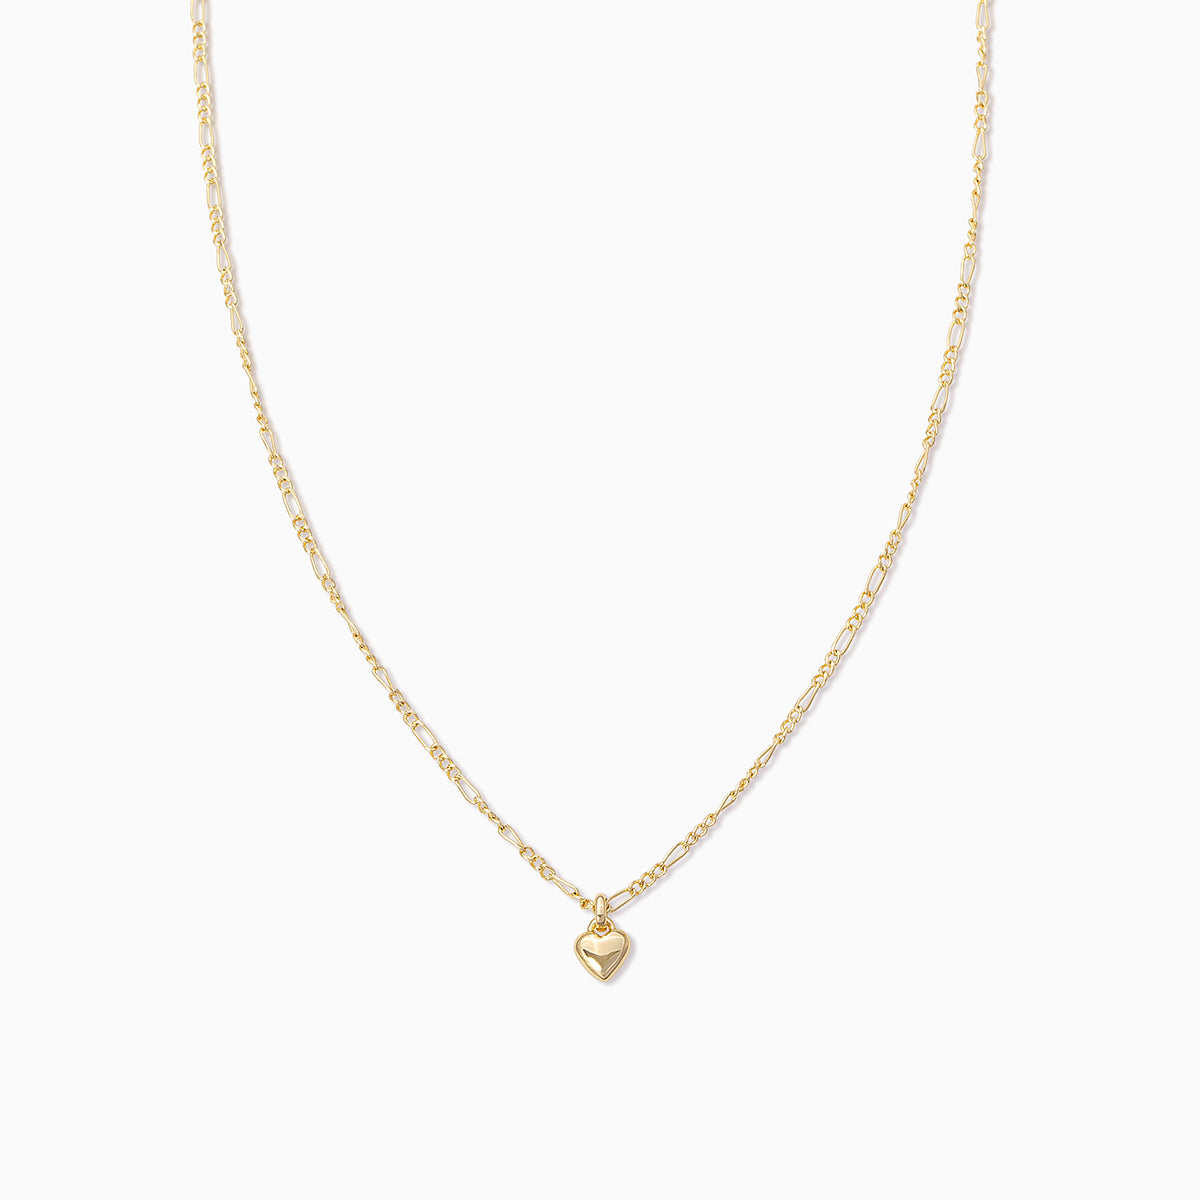 Mollis Necklace by Betsy & Iya | Woman-owned Portland jewelry store